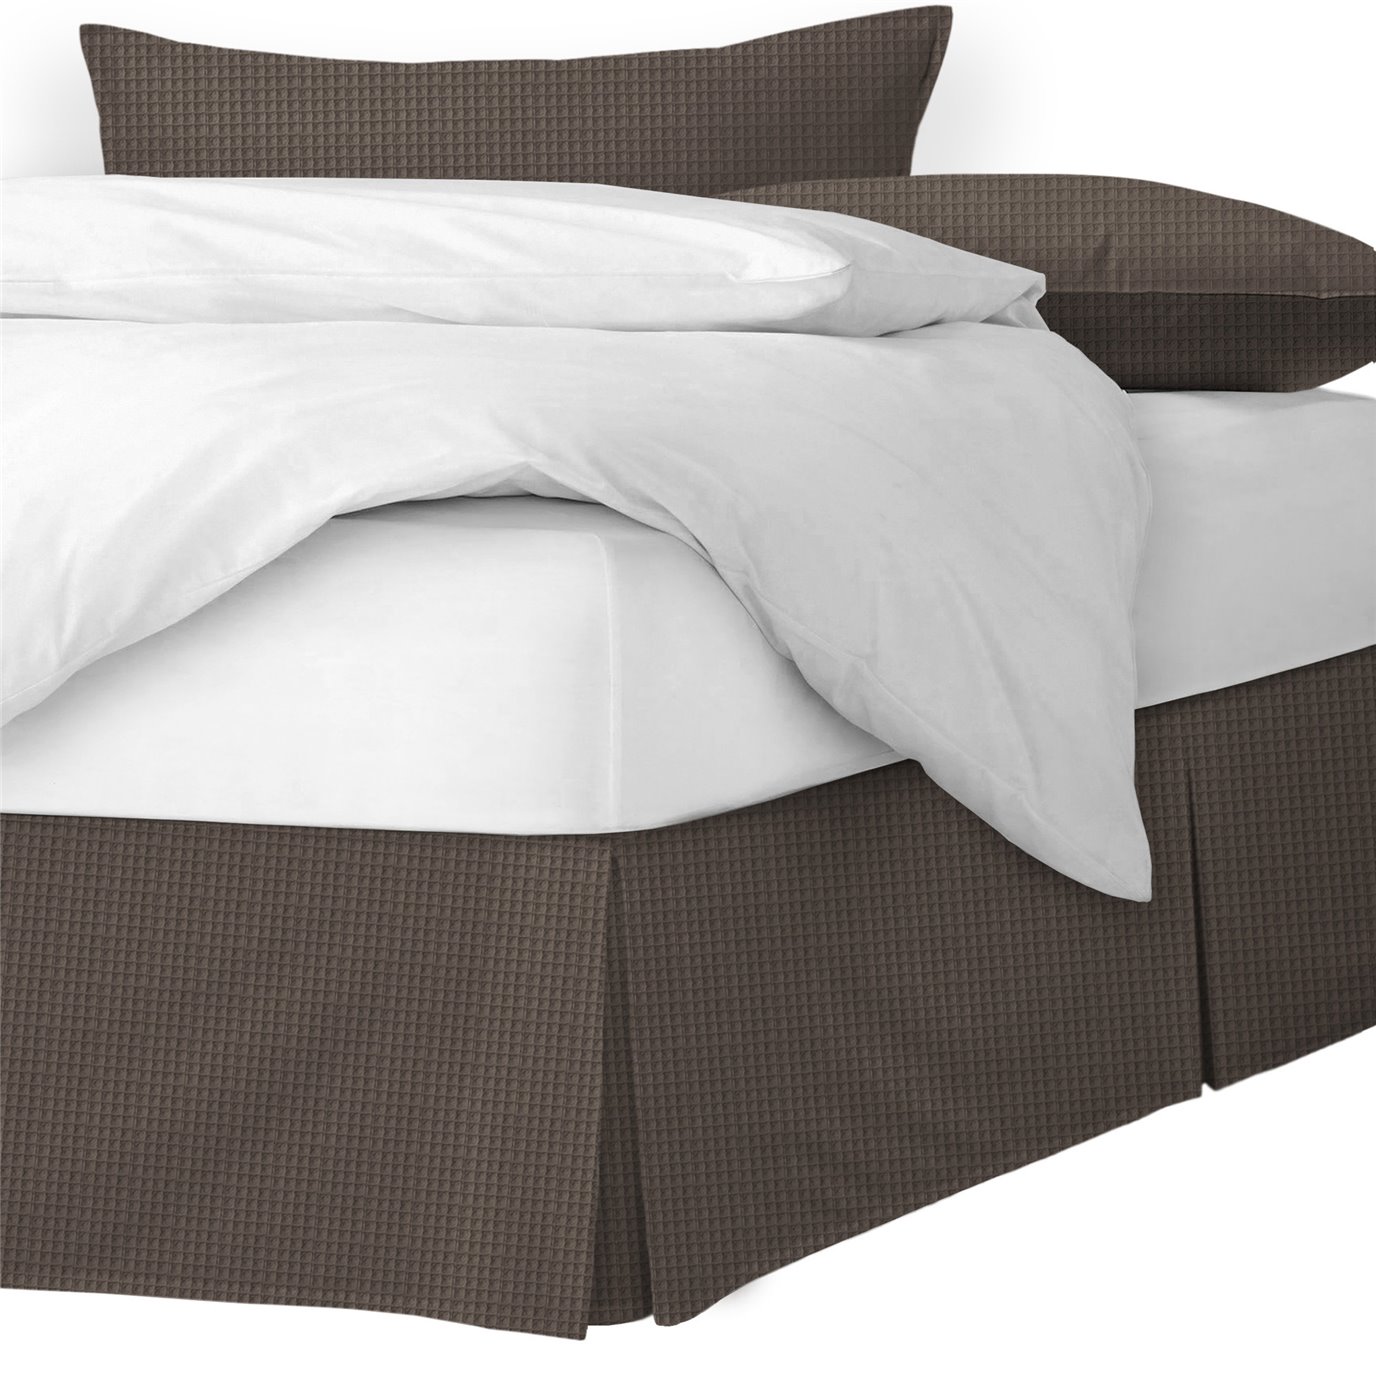 Classic Waffle Mocca Platform Bed Skirt - Size Queen 18" Drop